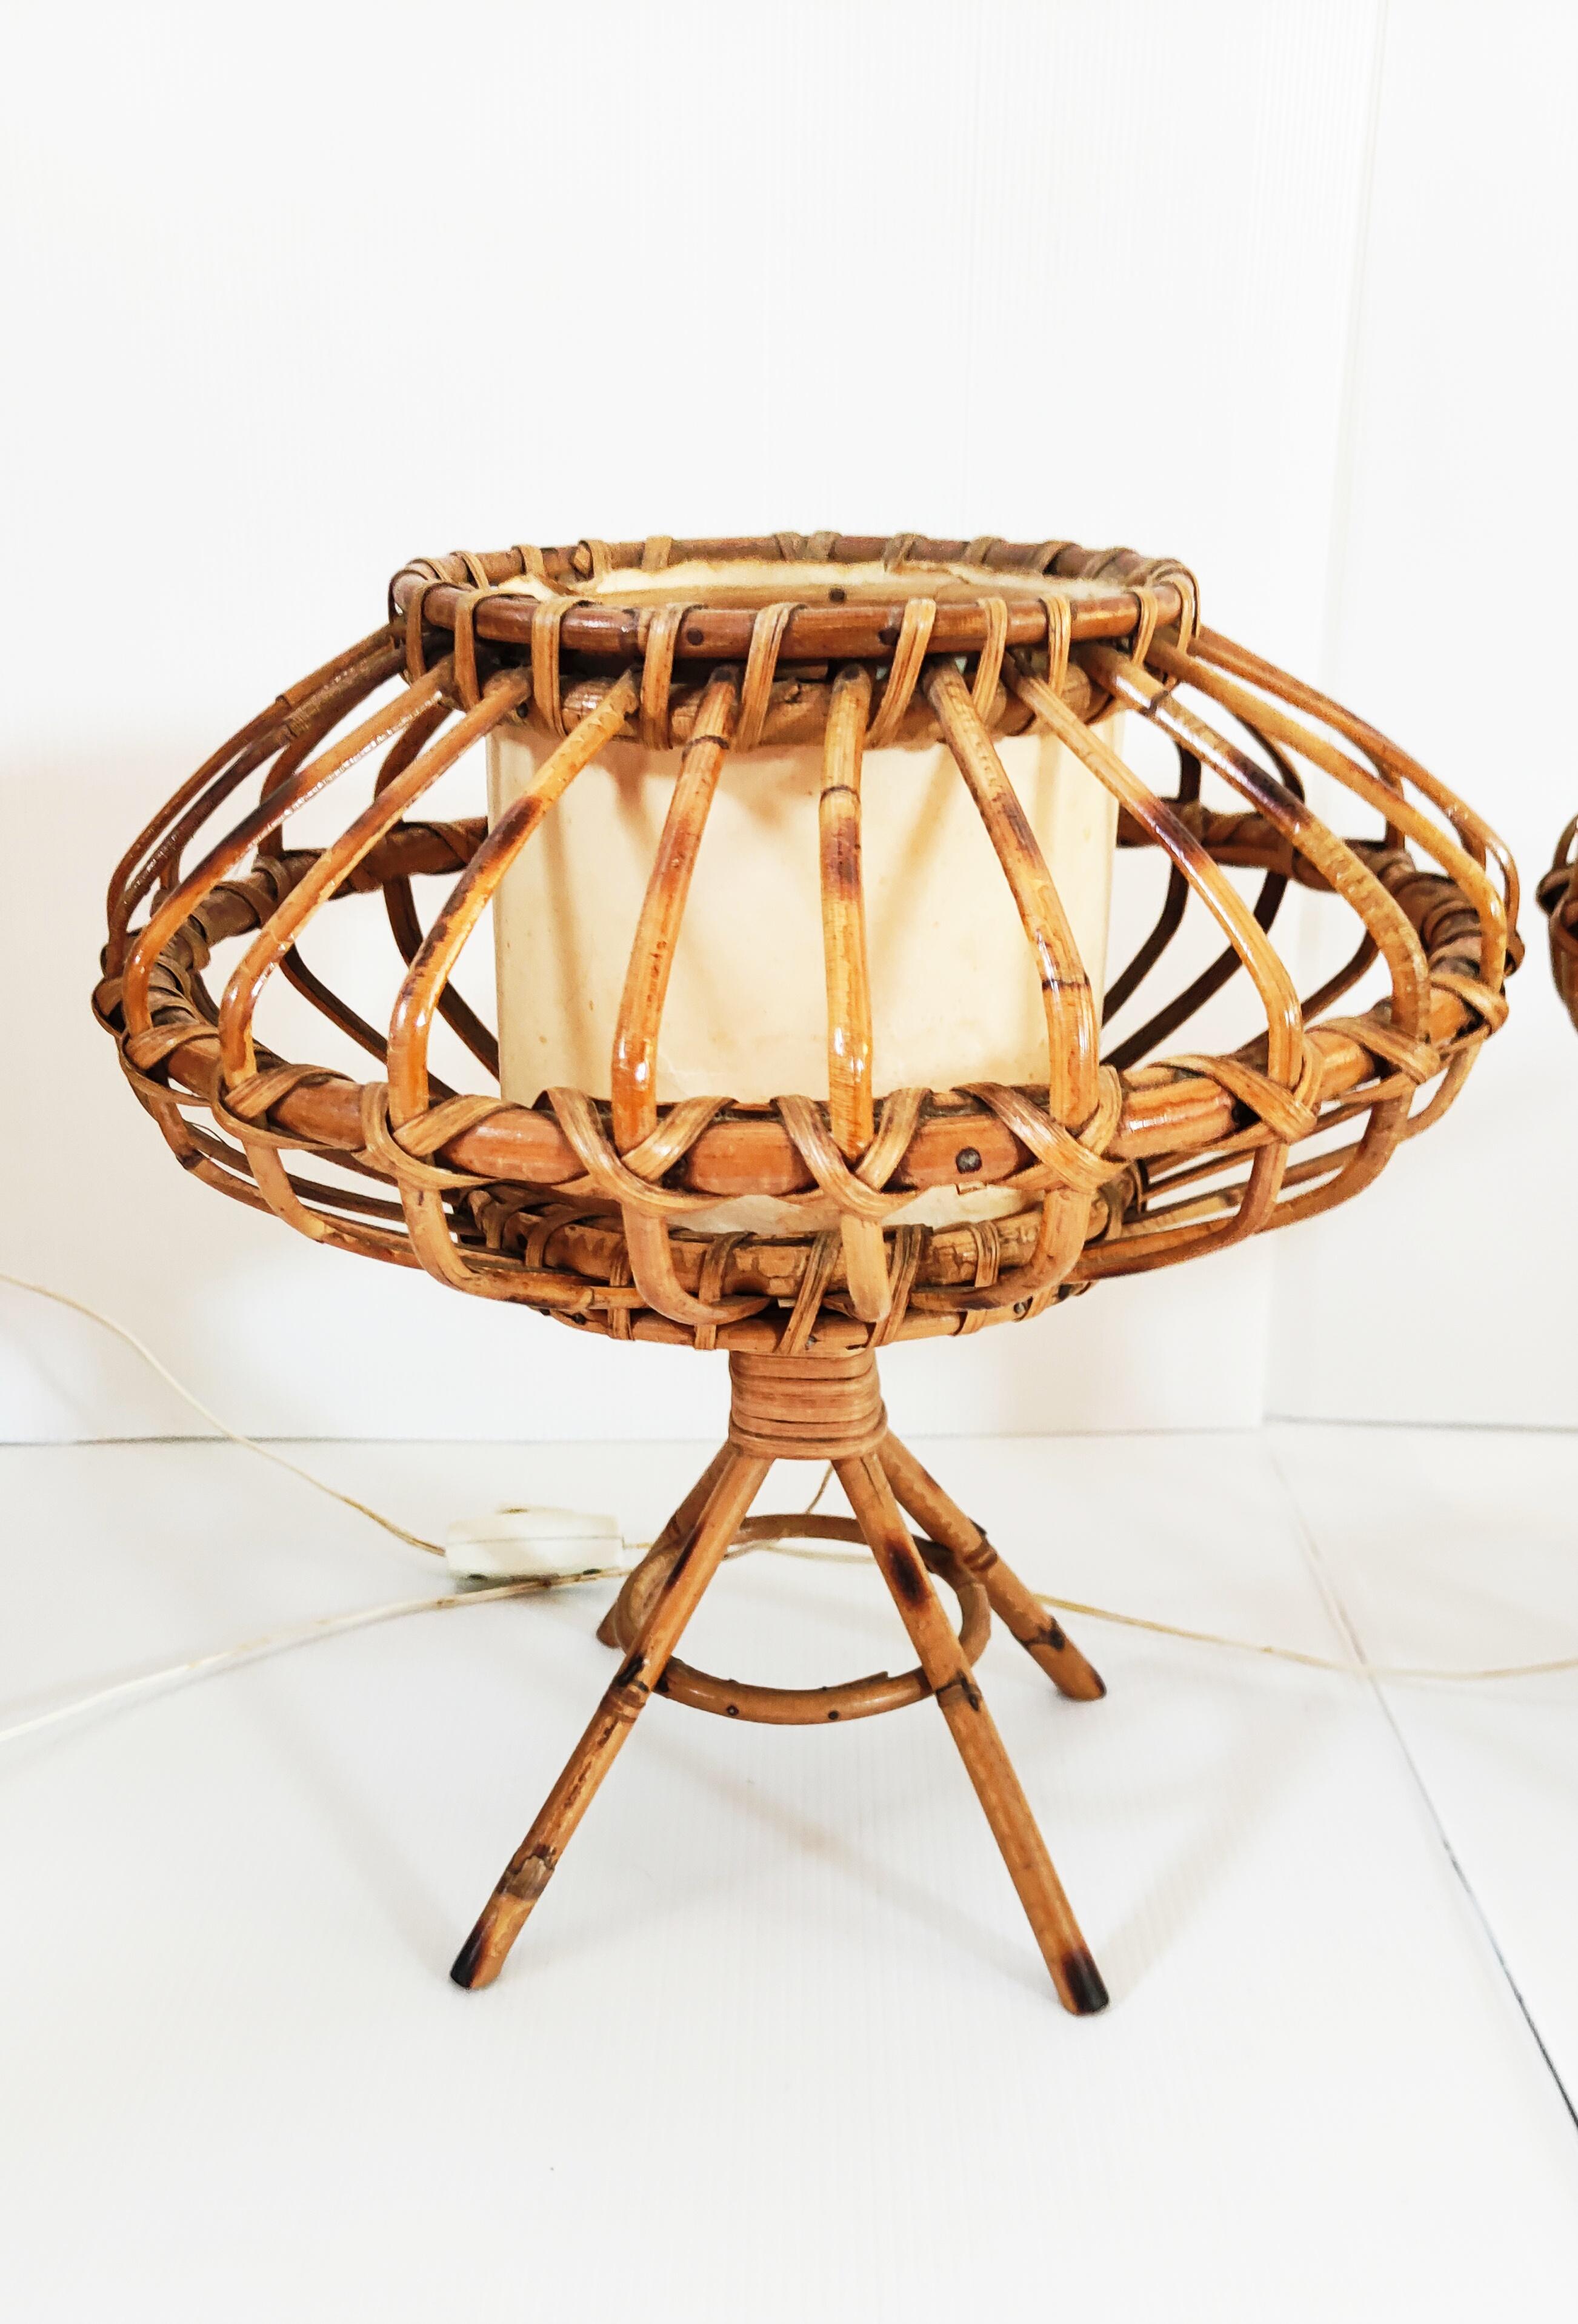 Bamboo Pair of Rattan Table Lamps, Spain, 1960s For Sale